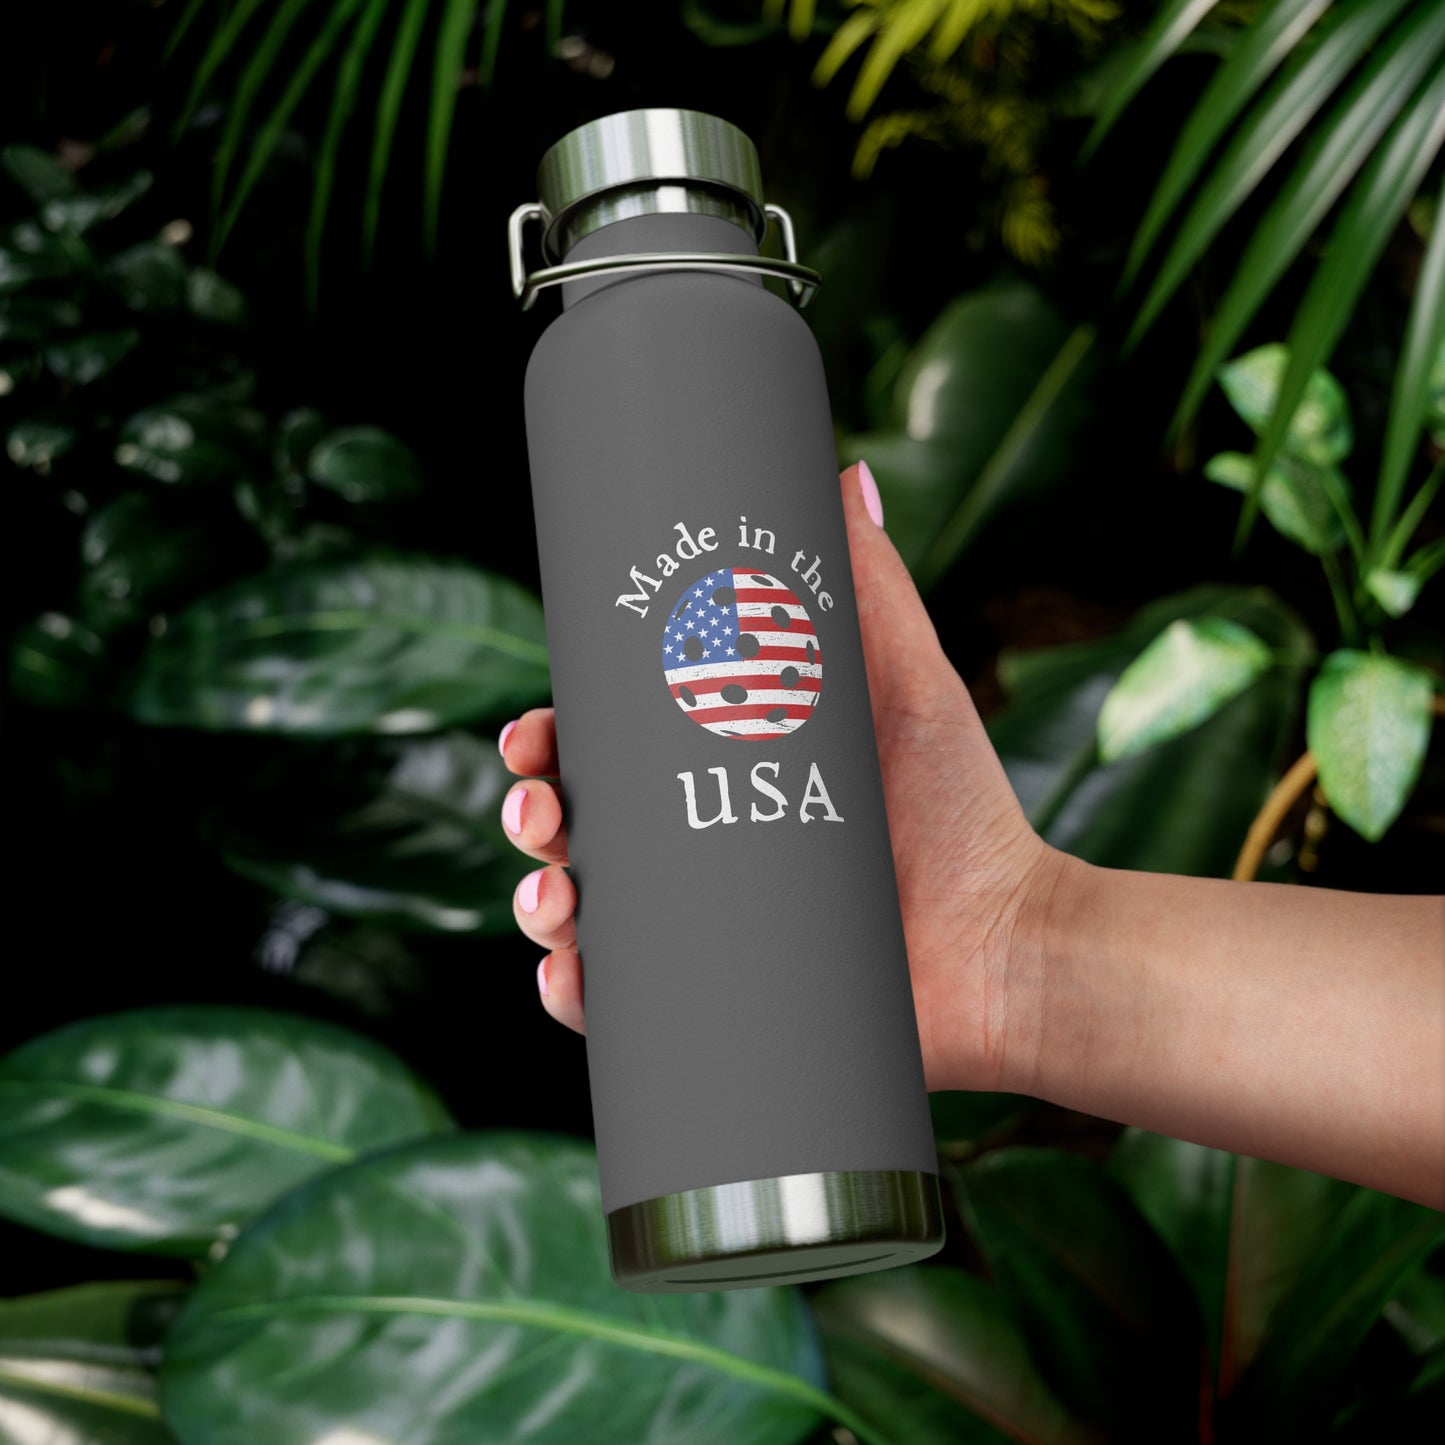 Made in the USA Pickleball Vacuum Insulated Bottle